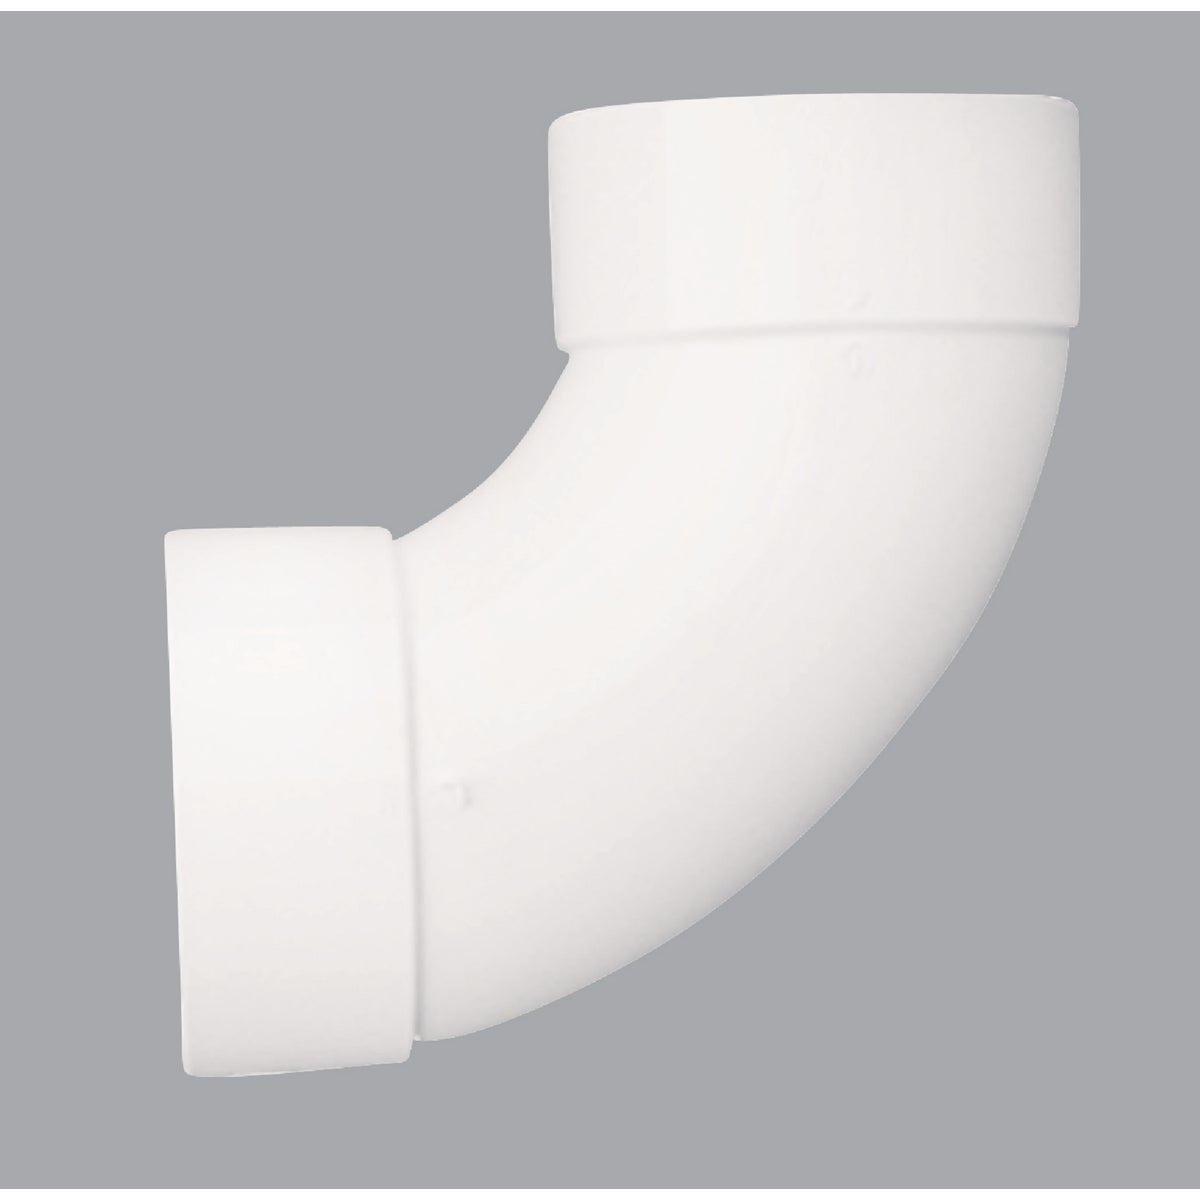 Item 401315, 90 degree Elbow made of PVC material provides durability.